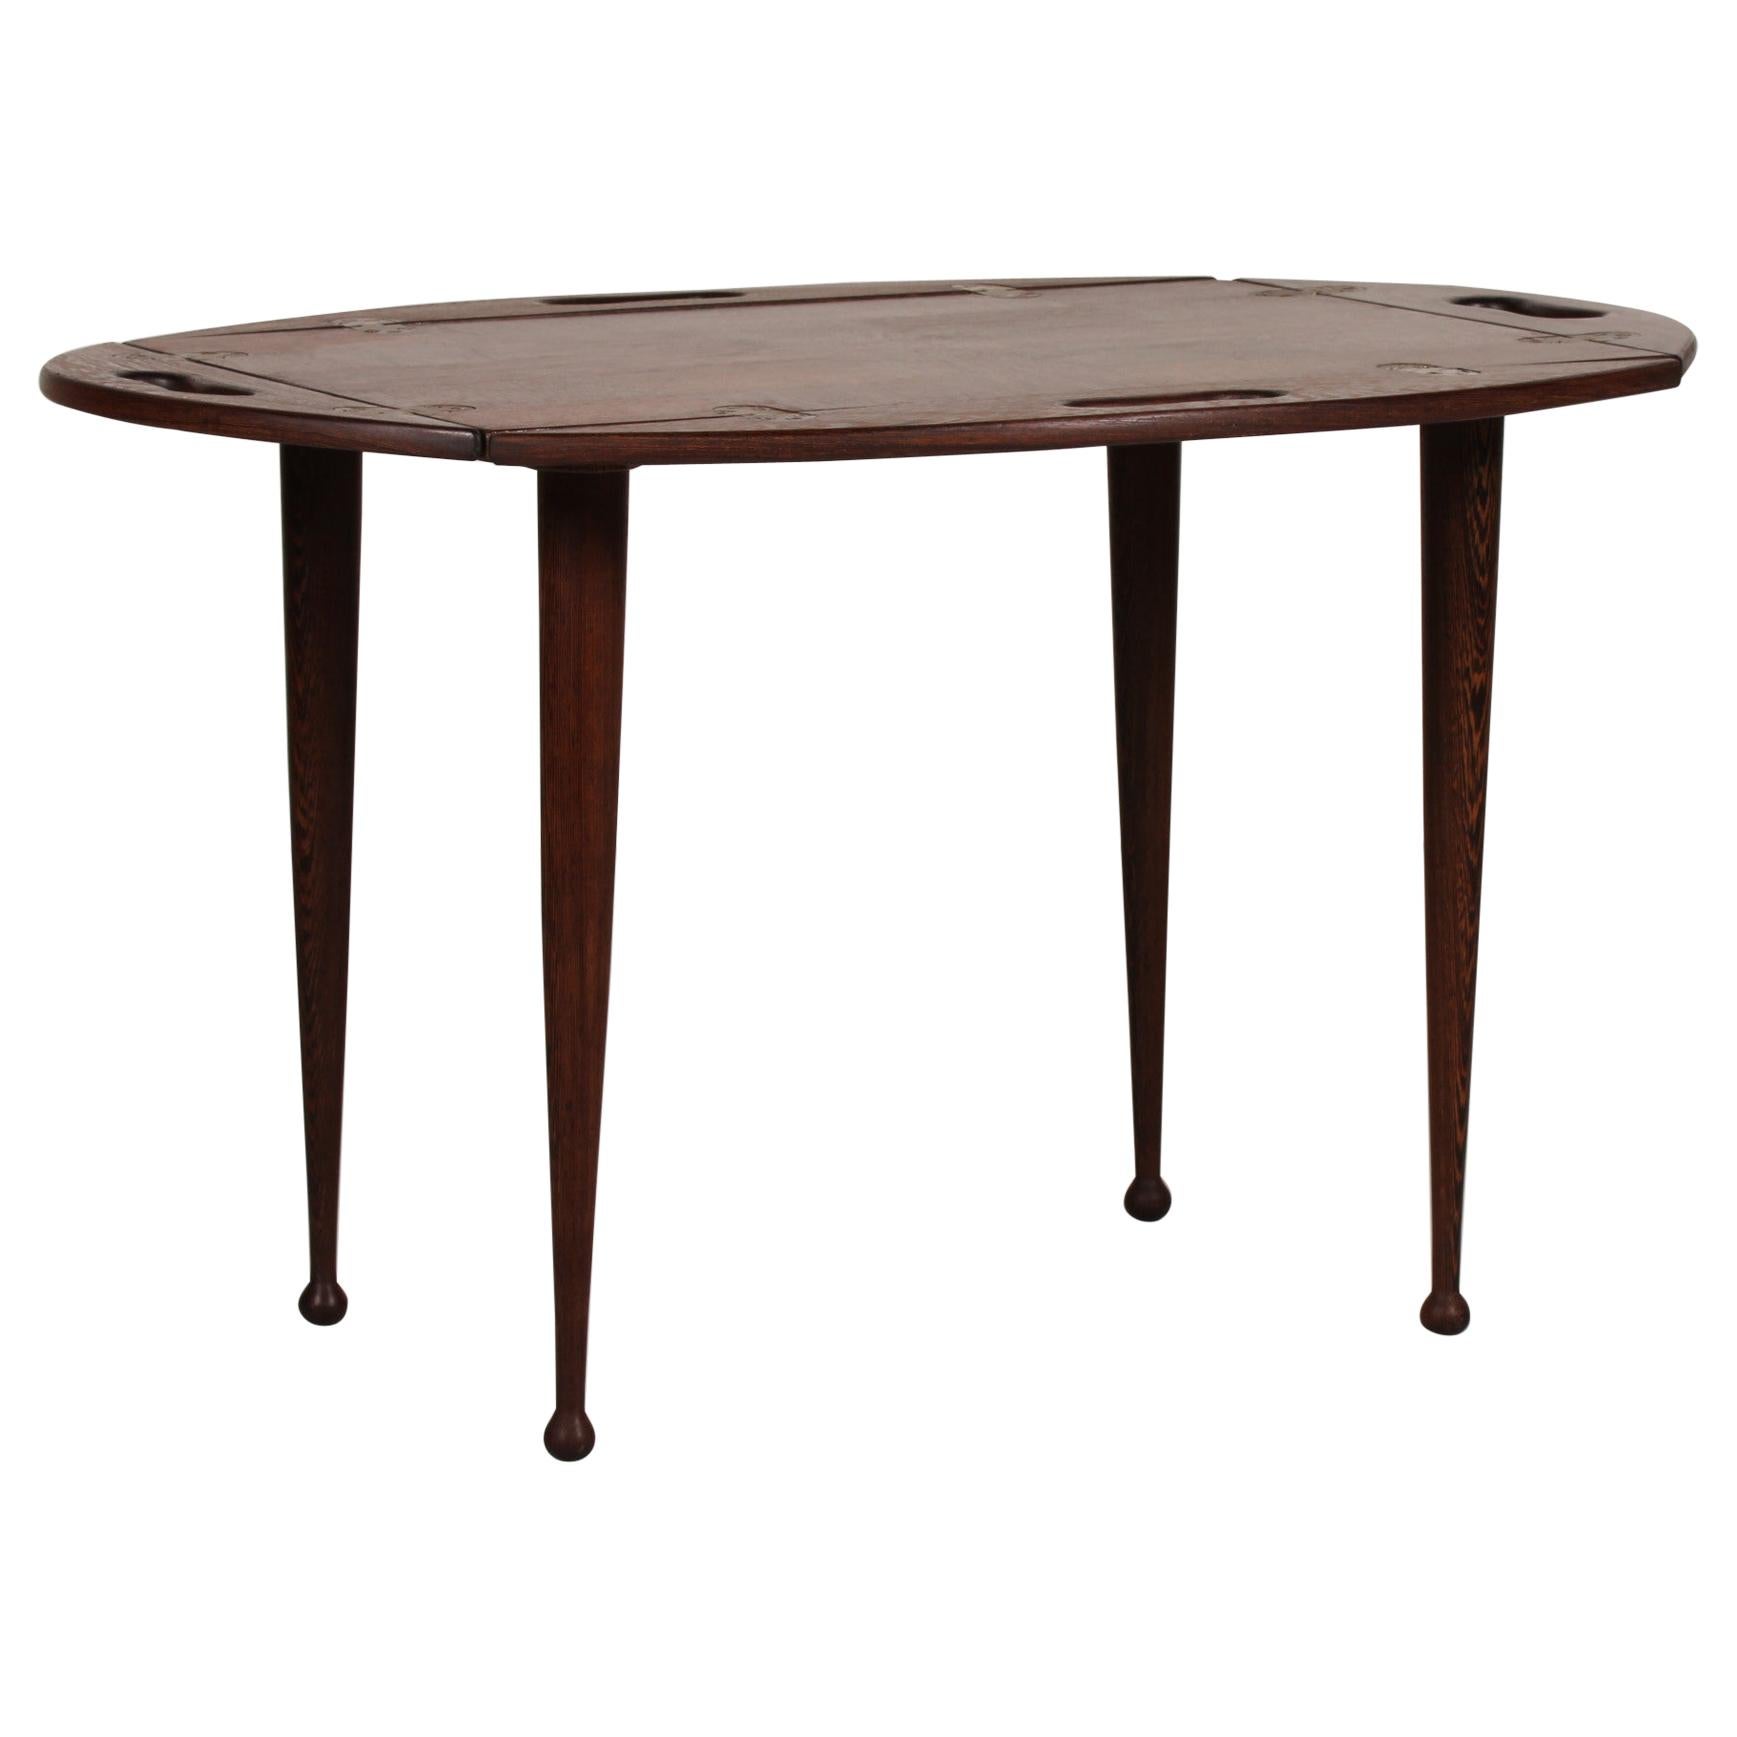 Jeanne Grut Style Butlers Tray of Wengé with Four Drumstick Legs Danish Modern For Sale